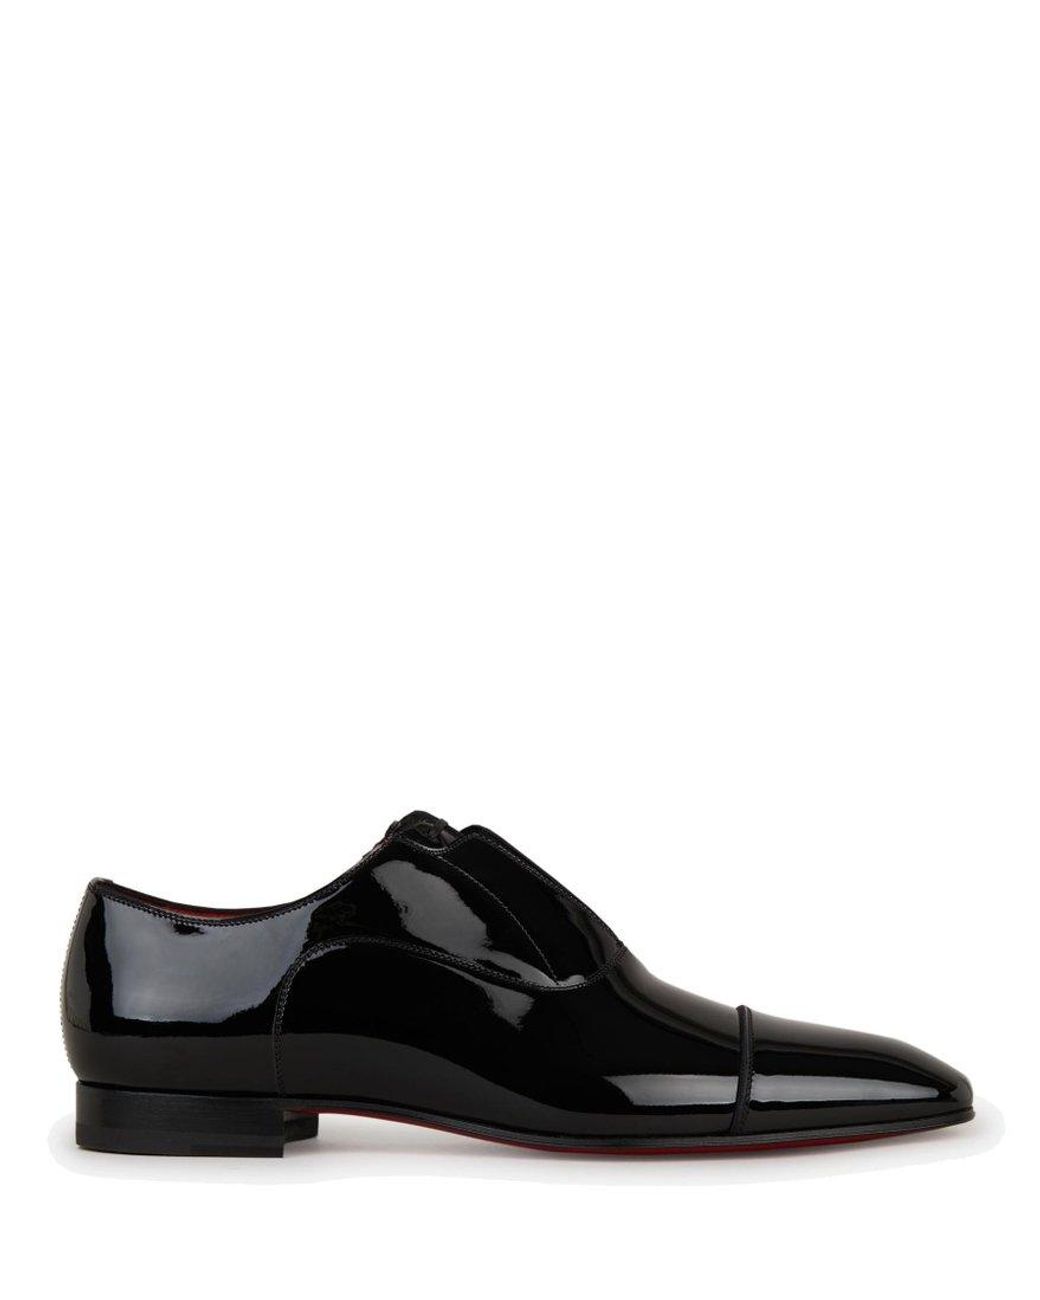 Christian Louboutin Men's Greghost Patent Leather Loafers